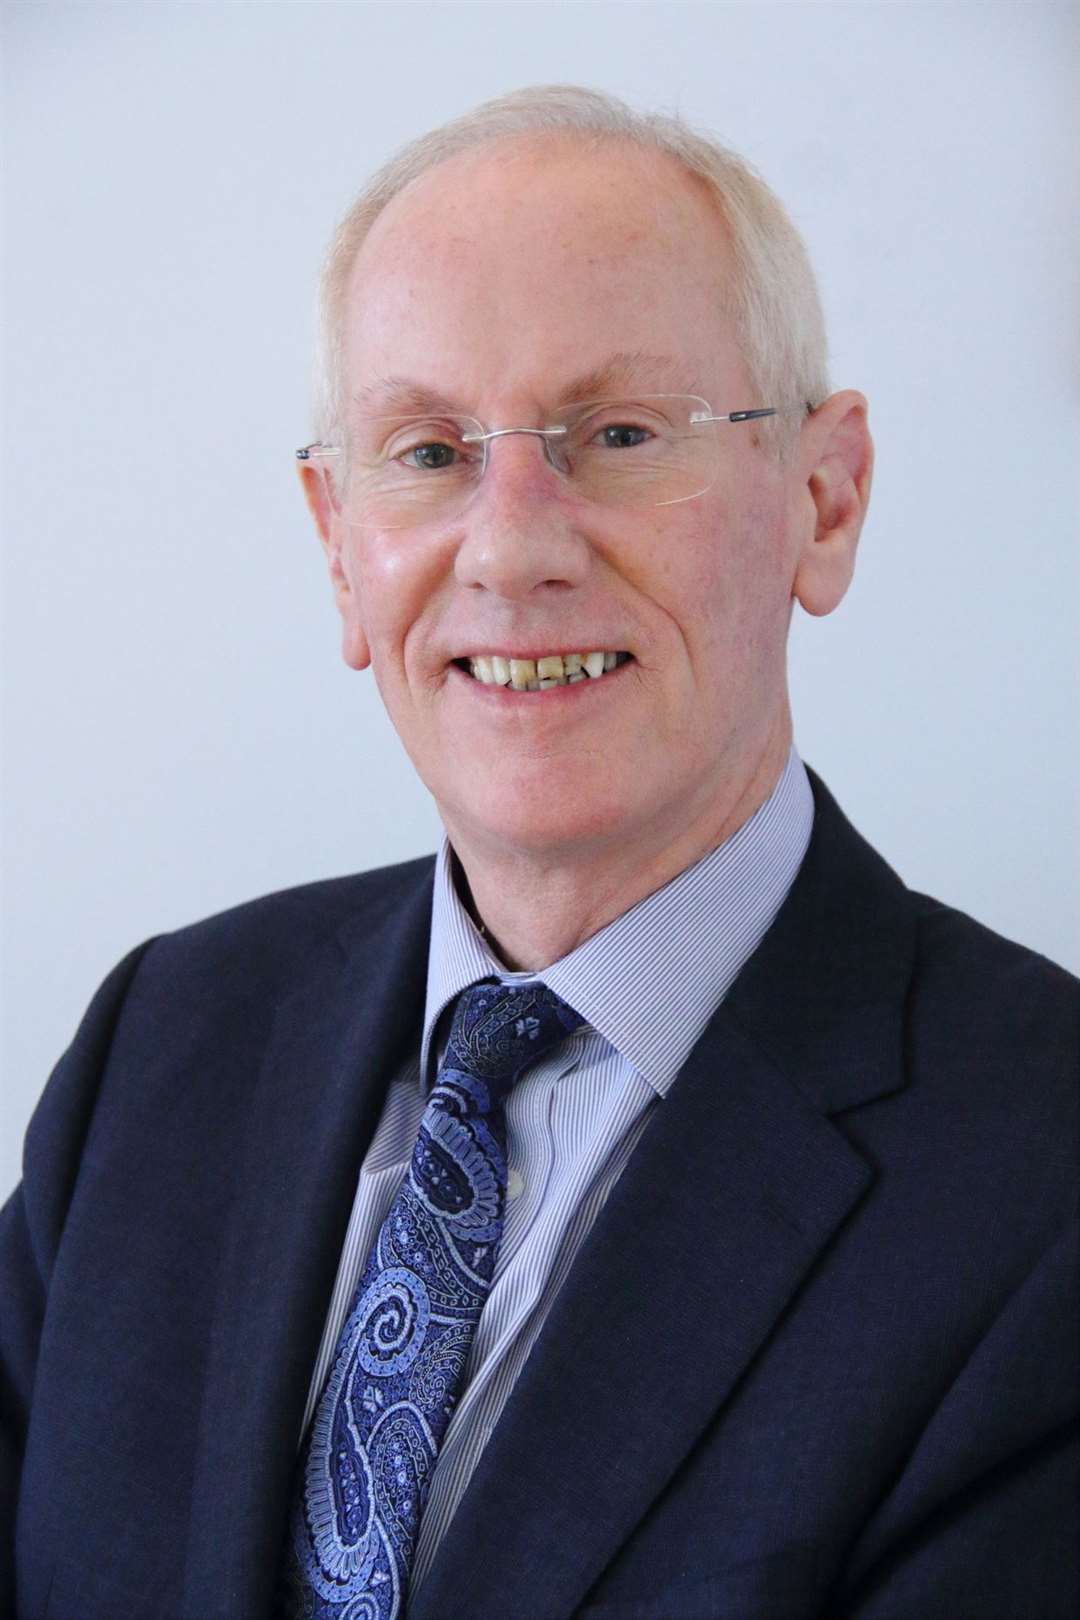 David Hughes is set to step down from Gravesham council in March